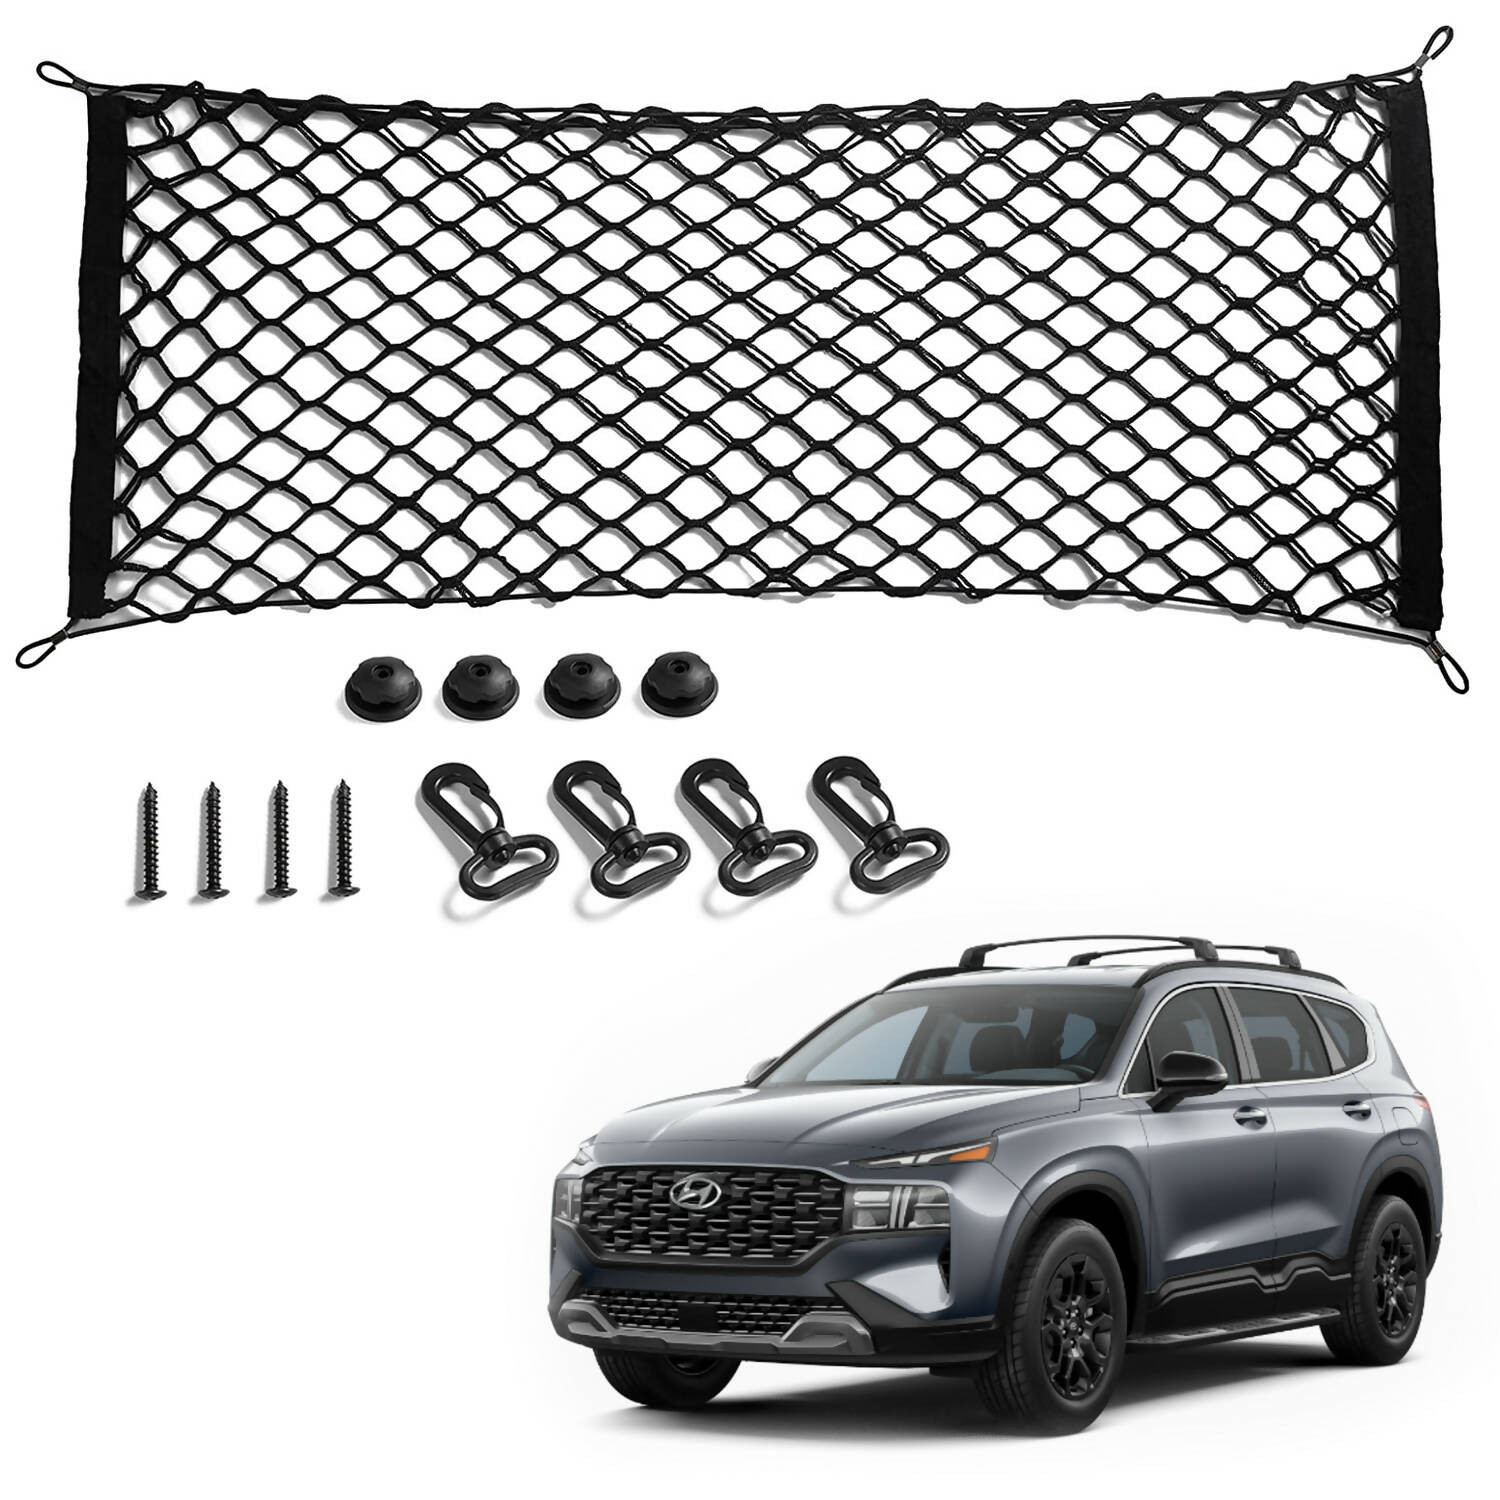 |AUTOWEAR| Universal Cargo Net for Sedan or SUV [MADE IN USA]